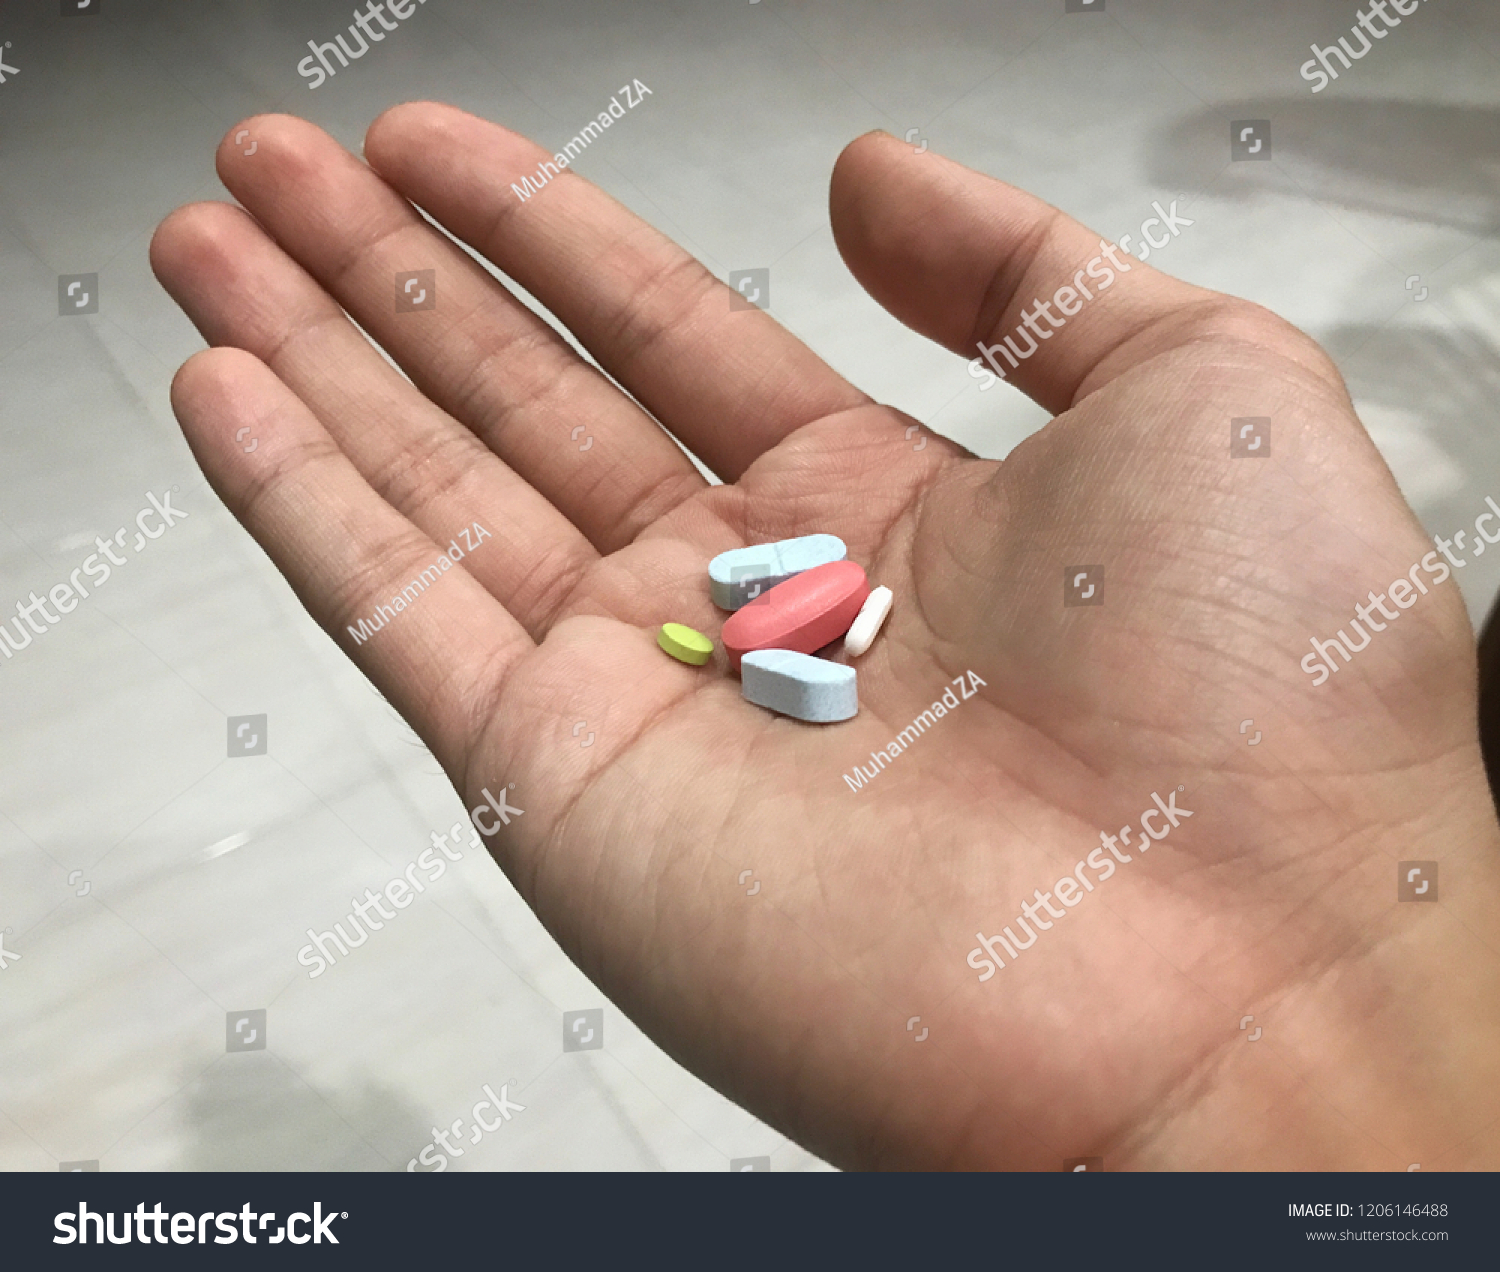 Colorful pills and medicines in the hand. Healthcare and medical concept. Image contains noise texture #1206146488